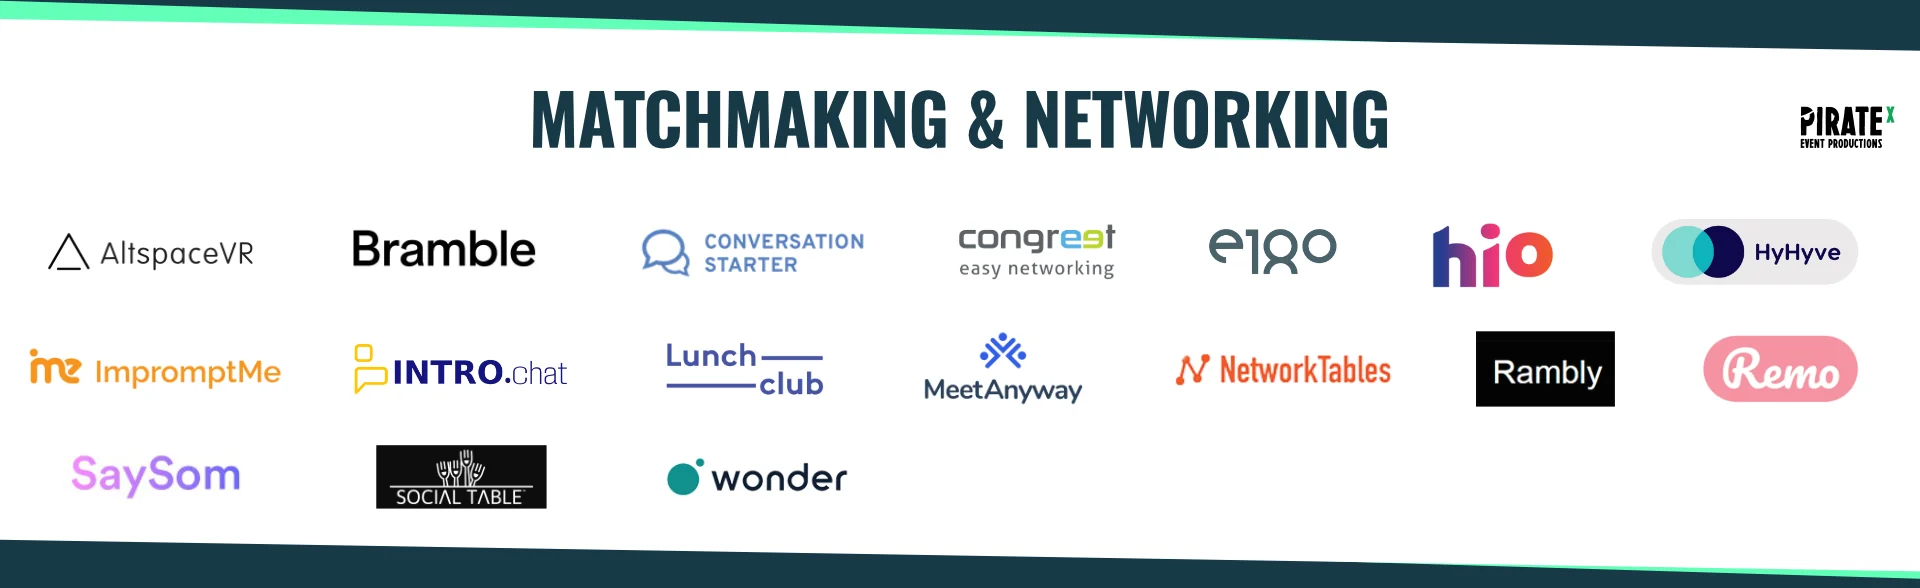 Overview of the Eventtech Landscape April 2021 Update Matchmaking & Networking Tools Category